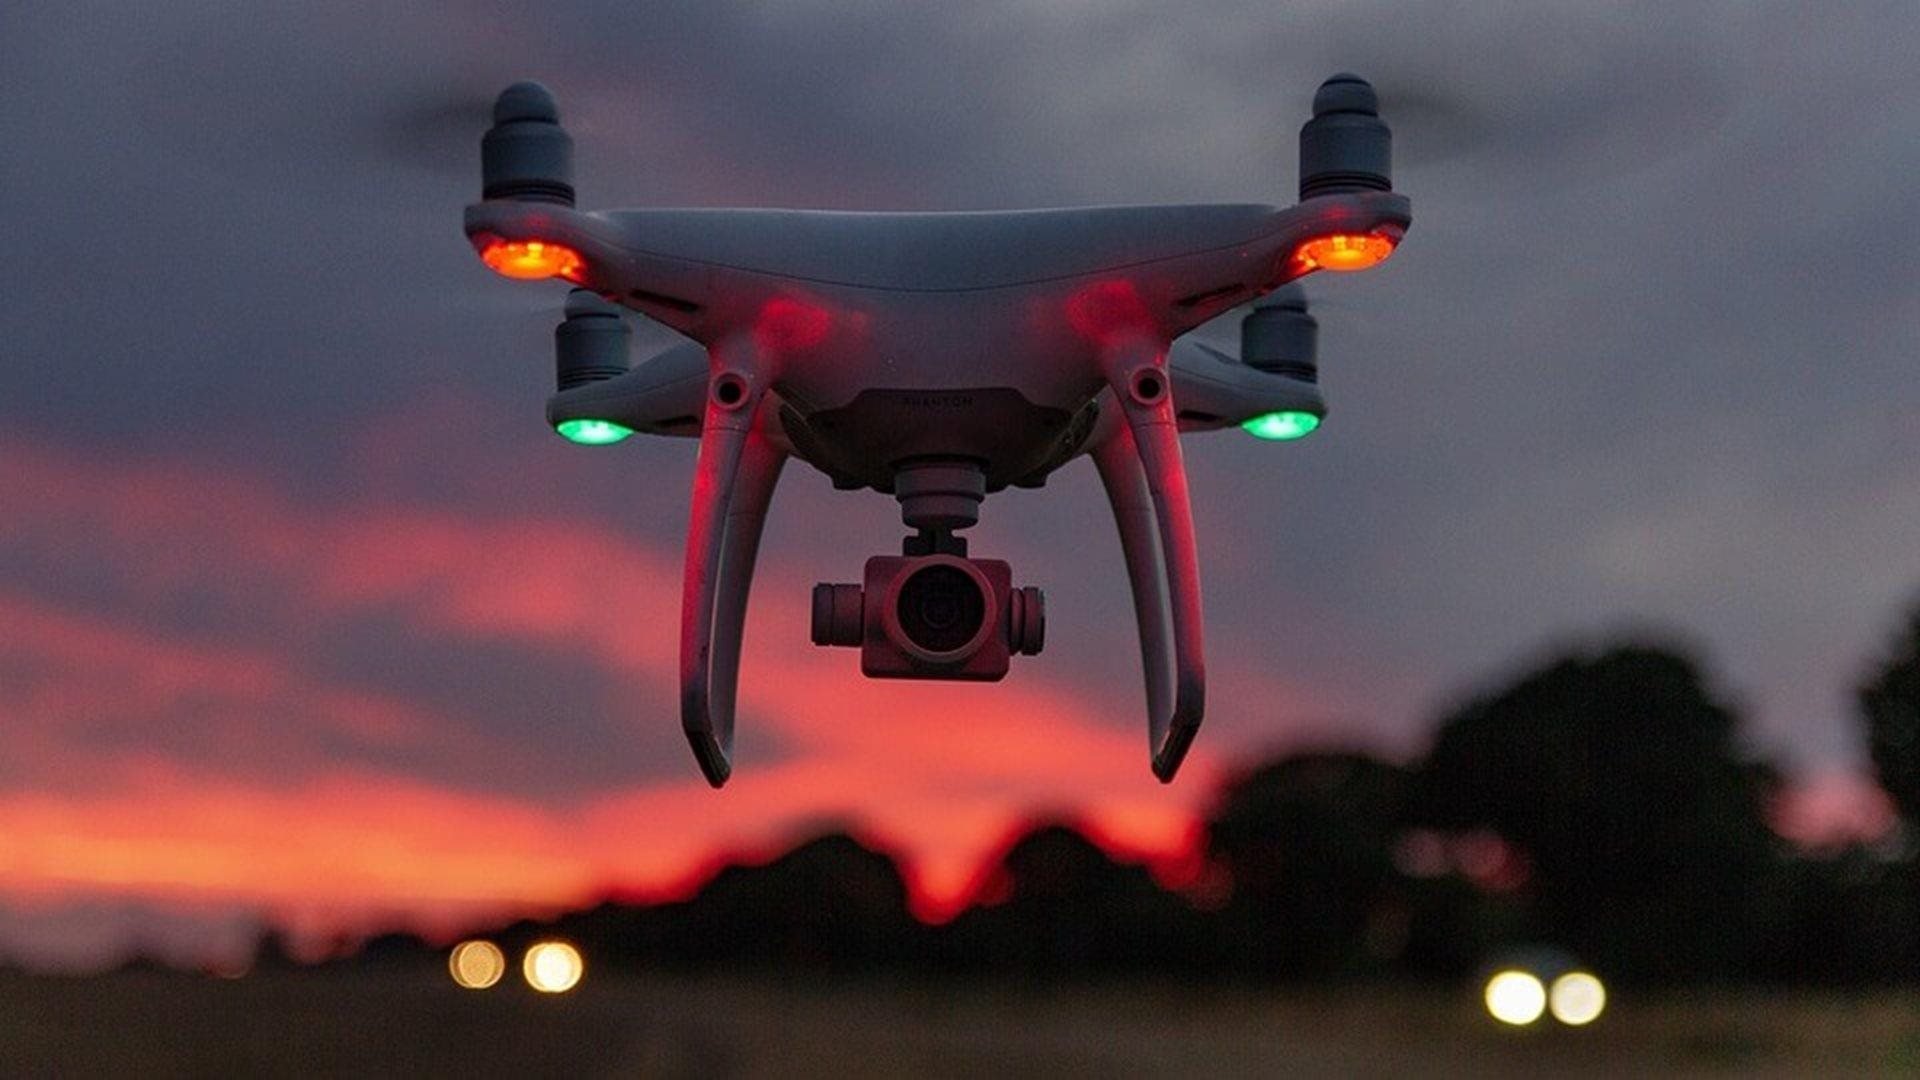 The legal landscape of drone usage